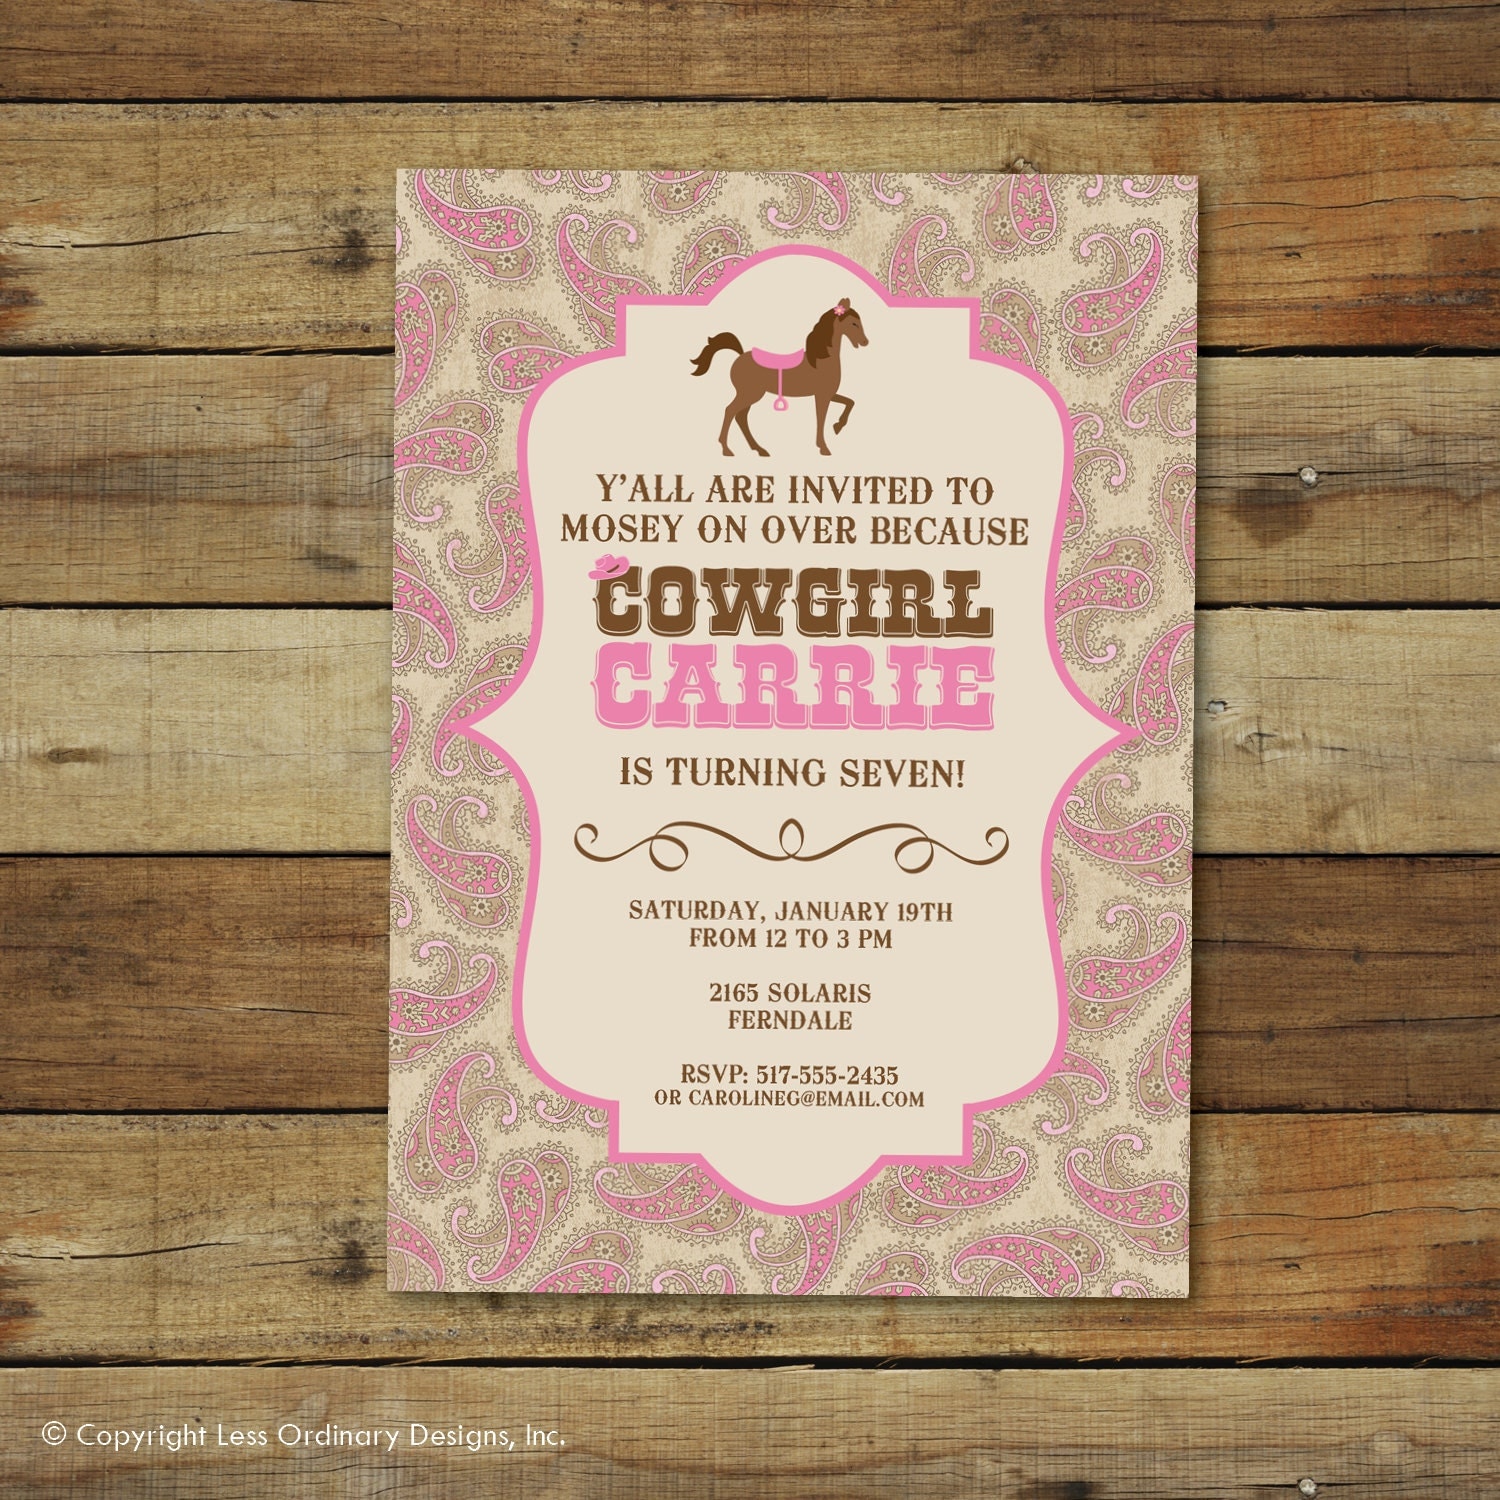 get-cowgirl-birthday-invitations-pictures-free-invitation-template